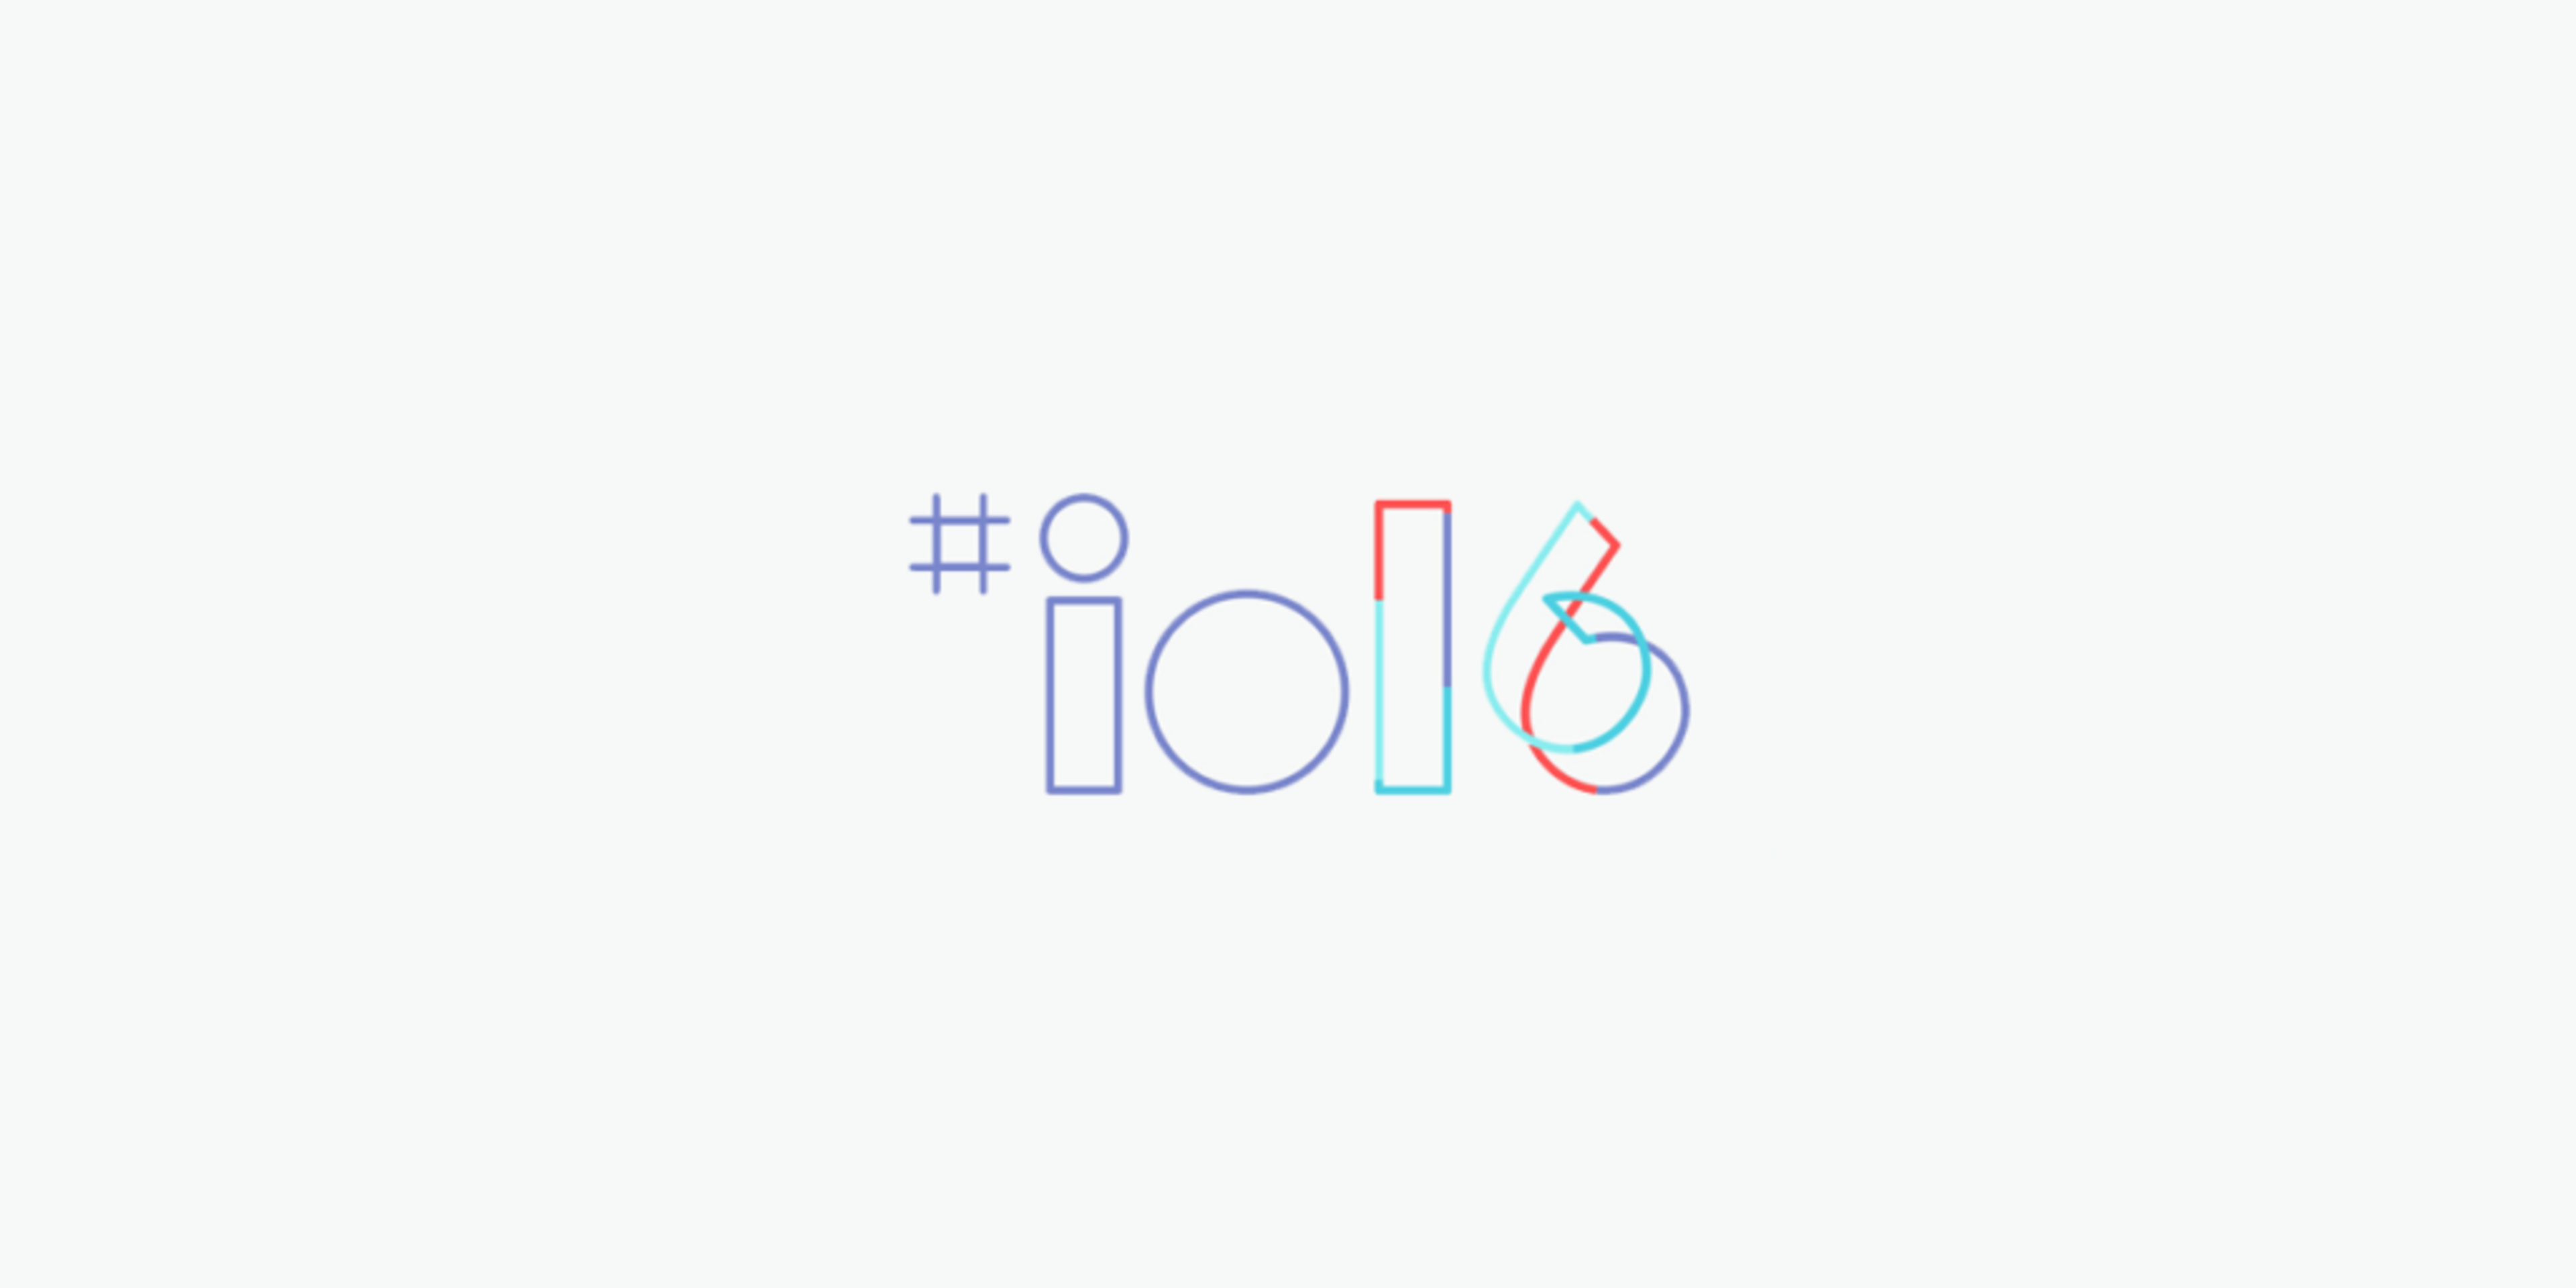 Logo from Google's I/O 2016 event reflecting prevalent themes of AI and IoT development